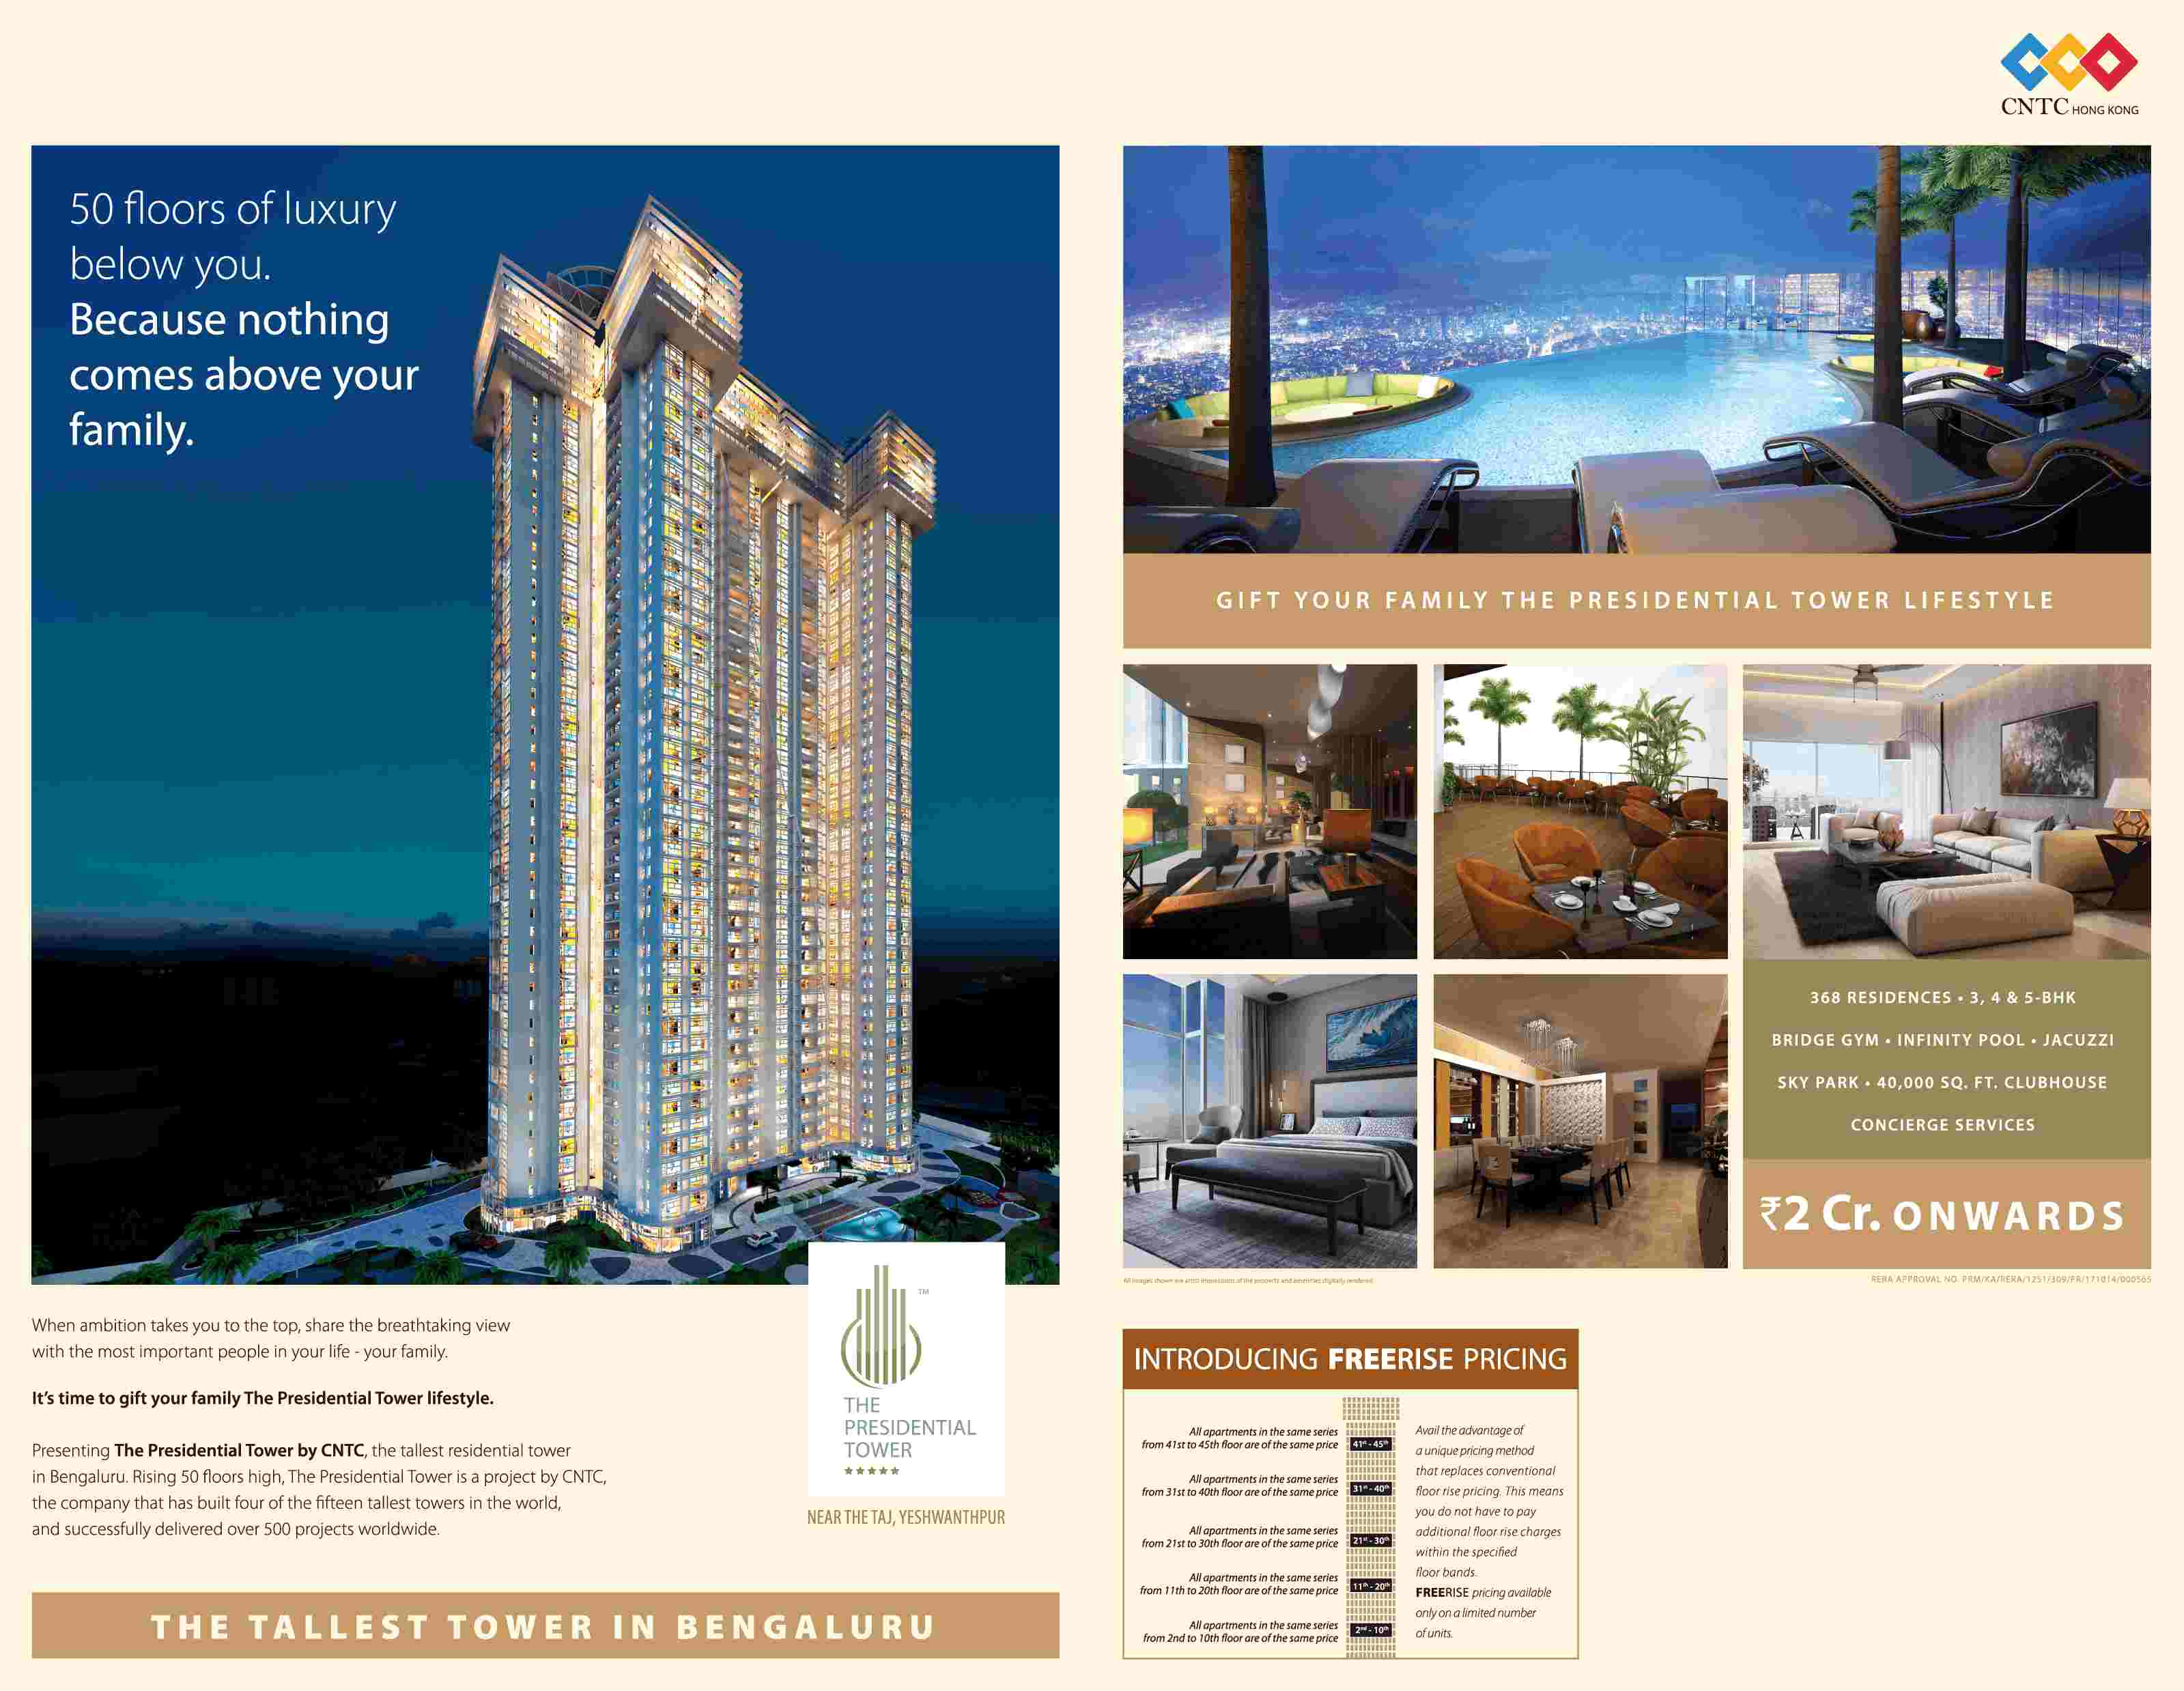 Presenting CNTC The Presidential Tower, tallest residential tower in Bengaluru